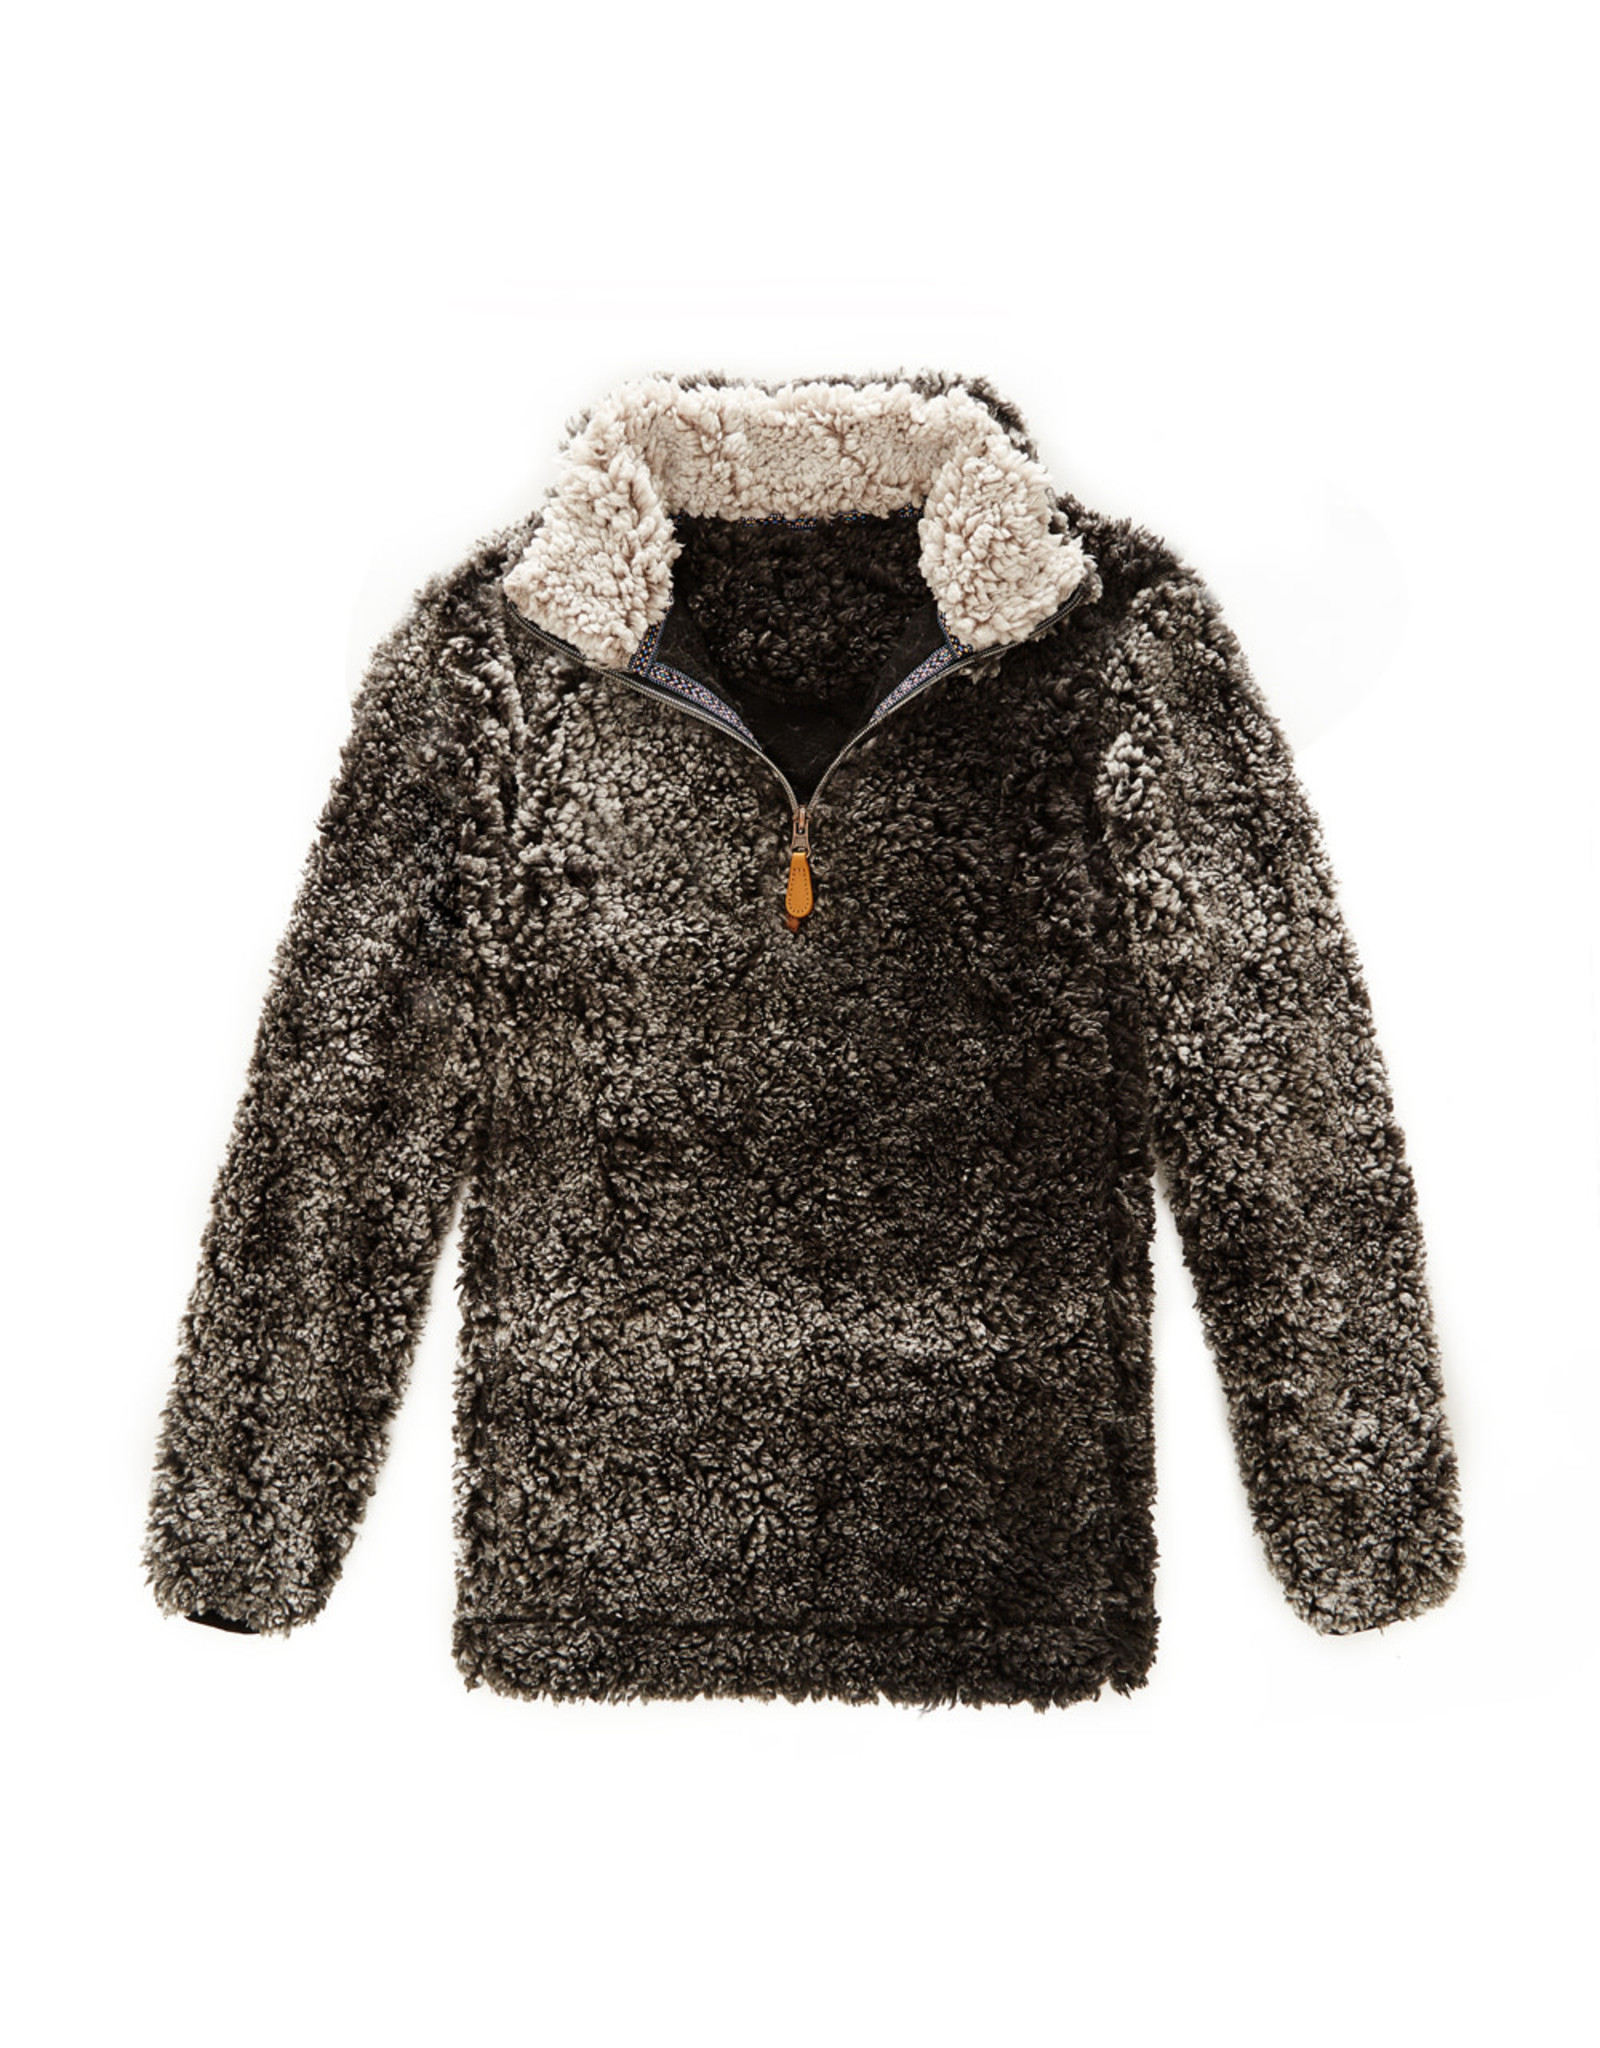 long sherpa pullover